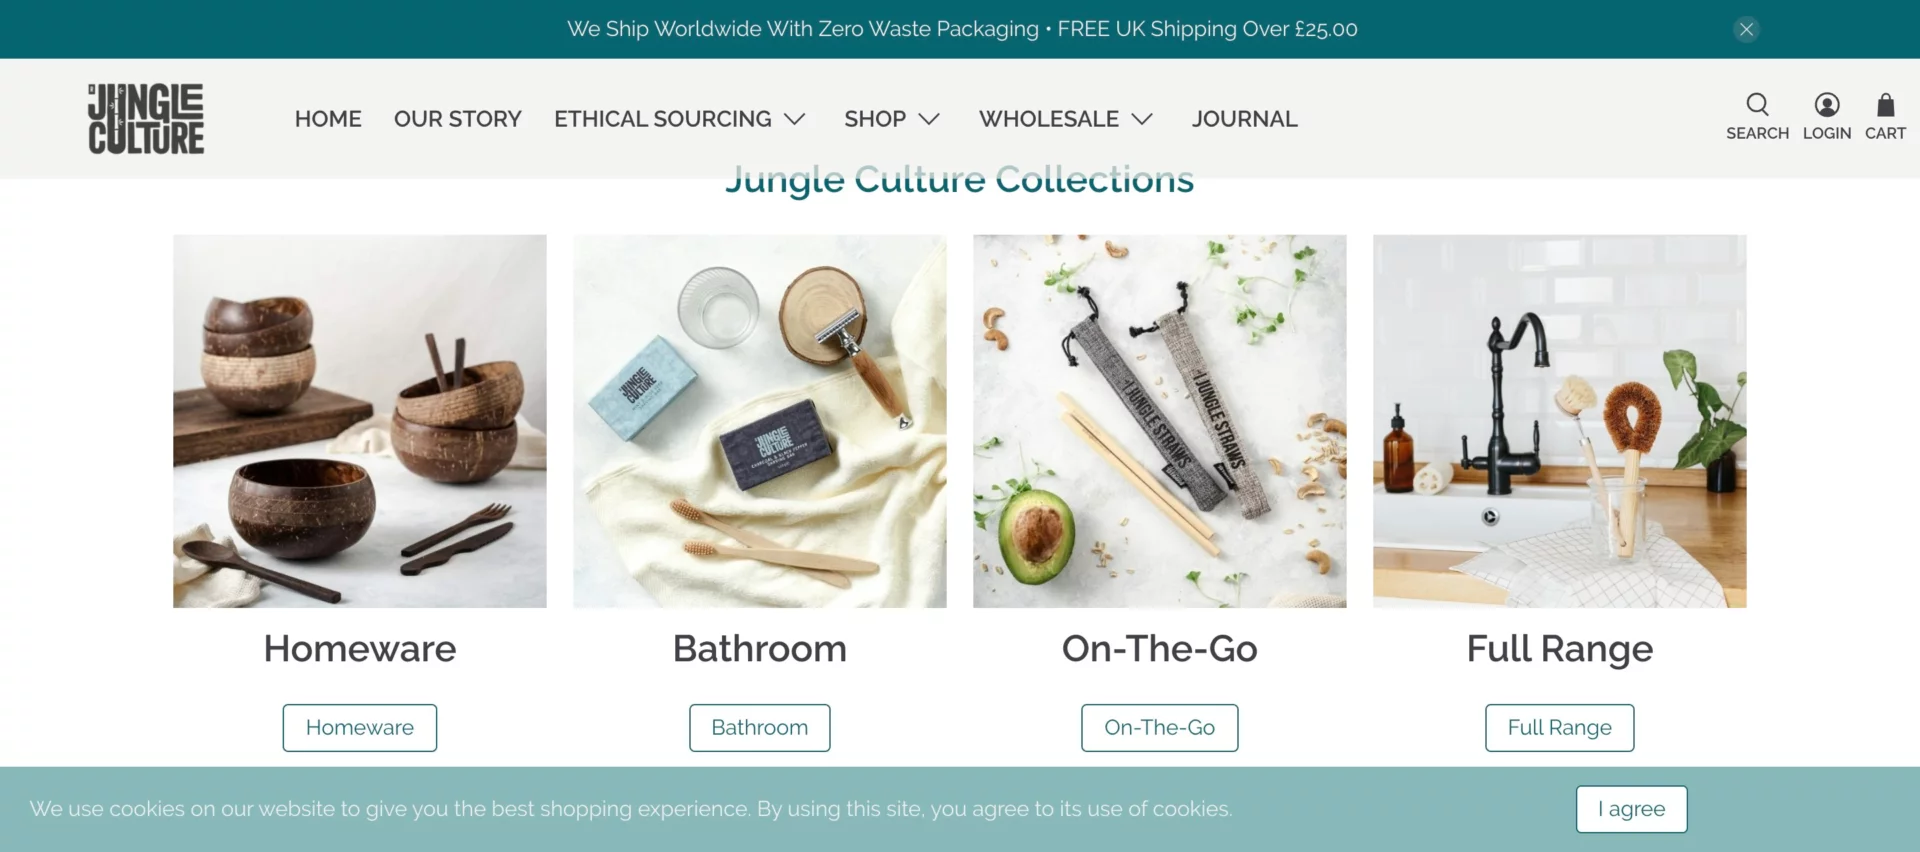 Jungle Culture Available Product Categories 